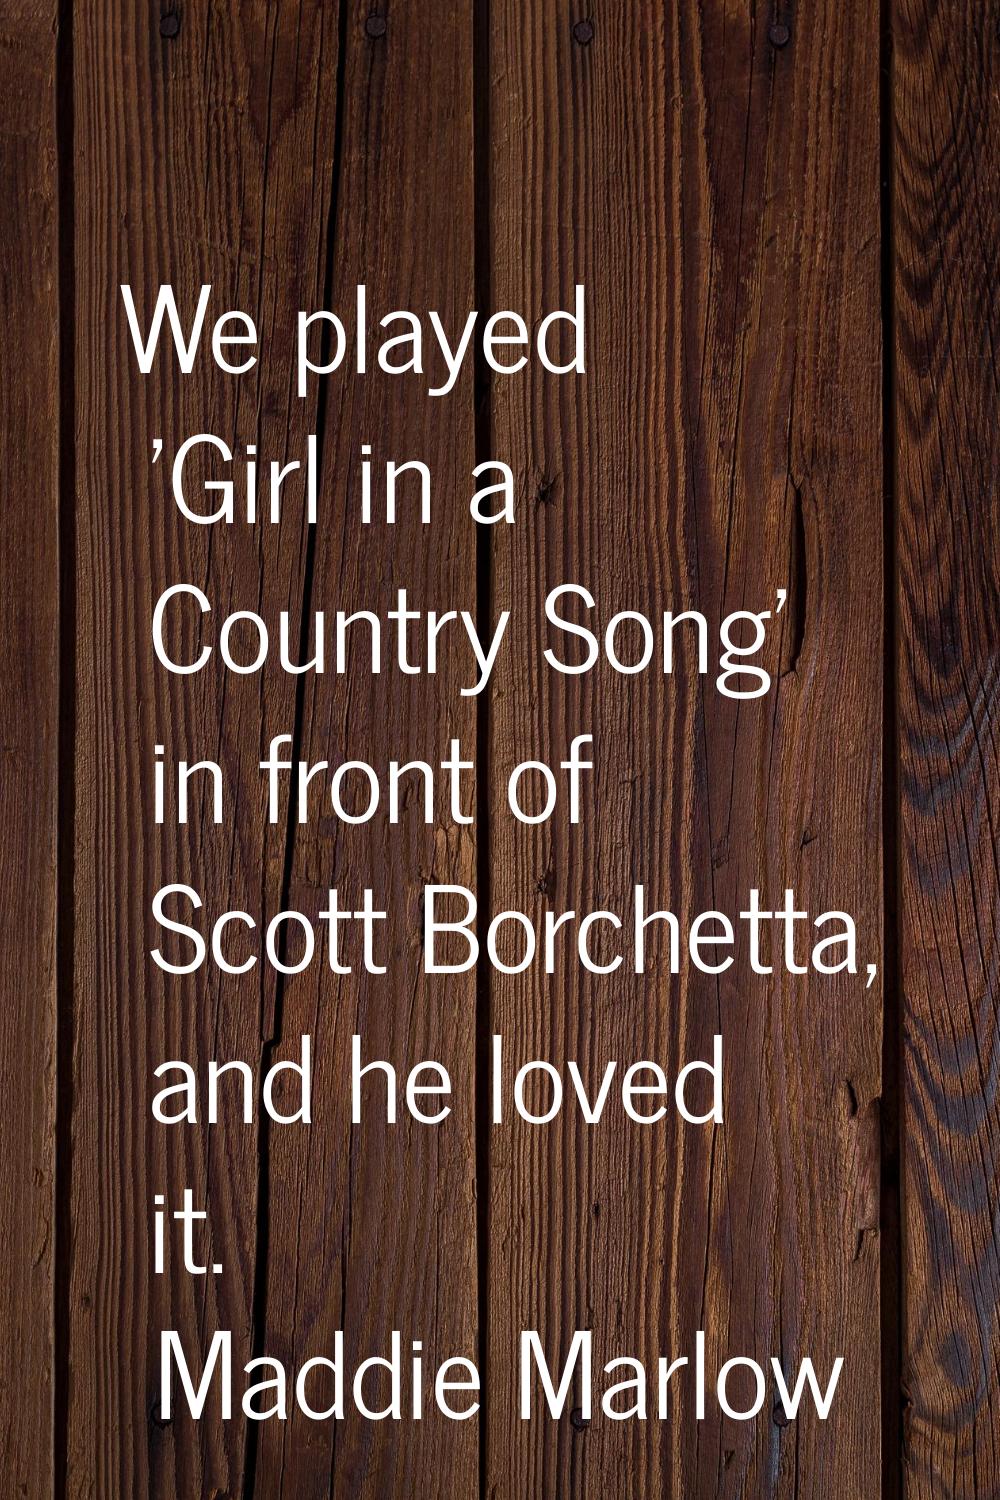 We played 'Girl in a Country Song' in front of Scott Borchetta, and he loved it.